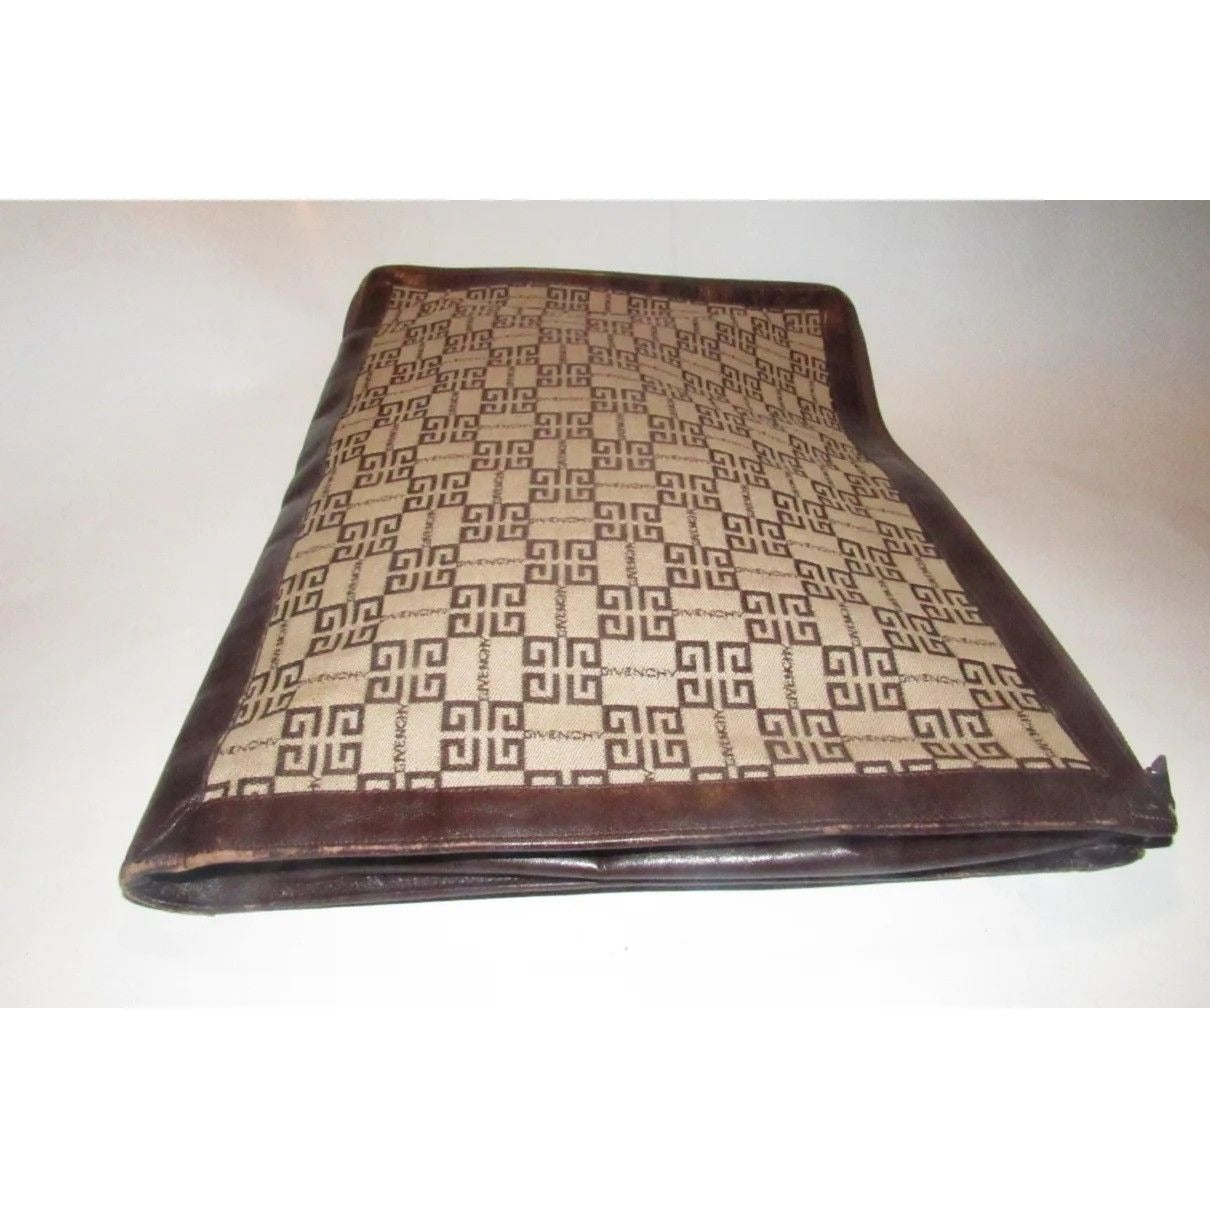 Vintage Givenchy, XL expandable clutch/laptop bag made with brown Givenchy logo print on beige canvas and brown leather